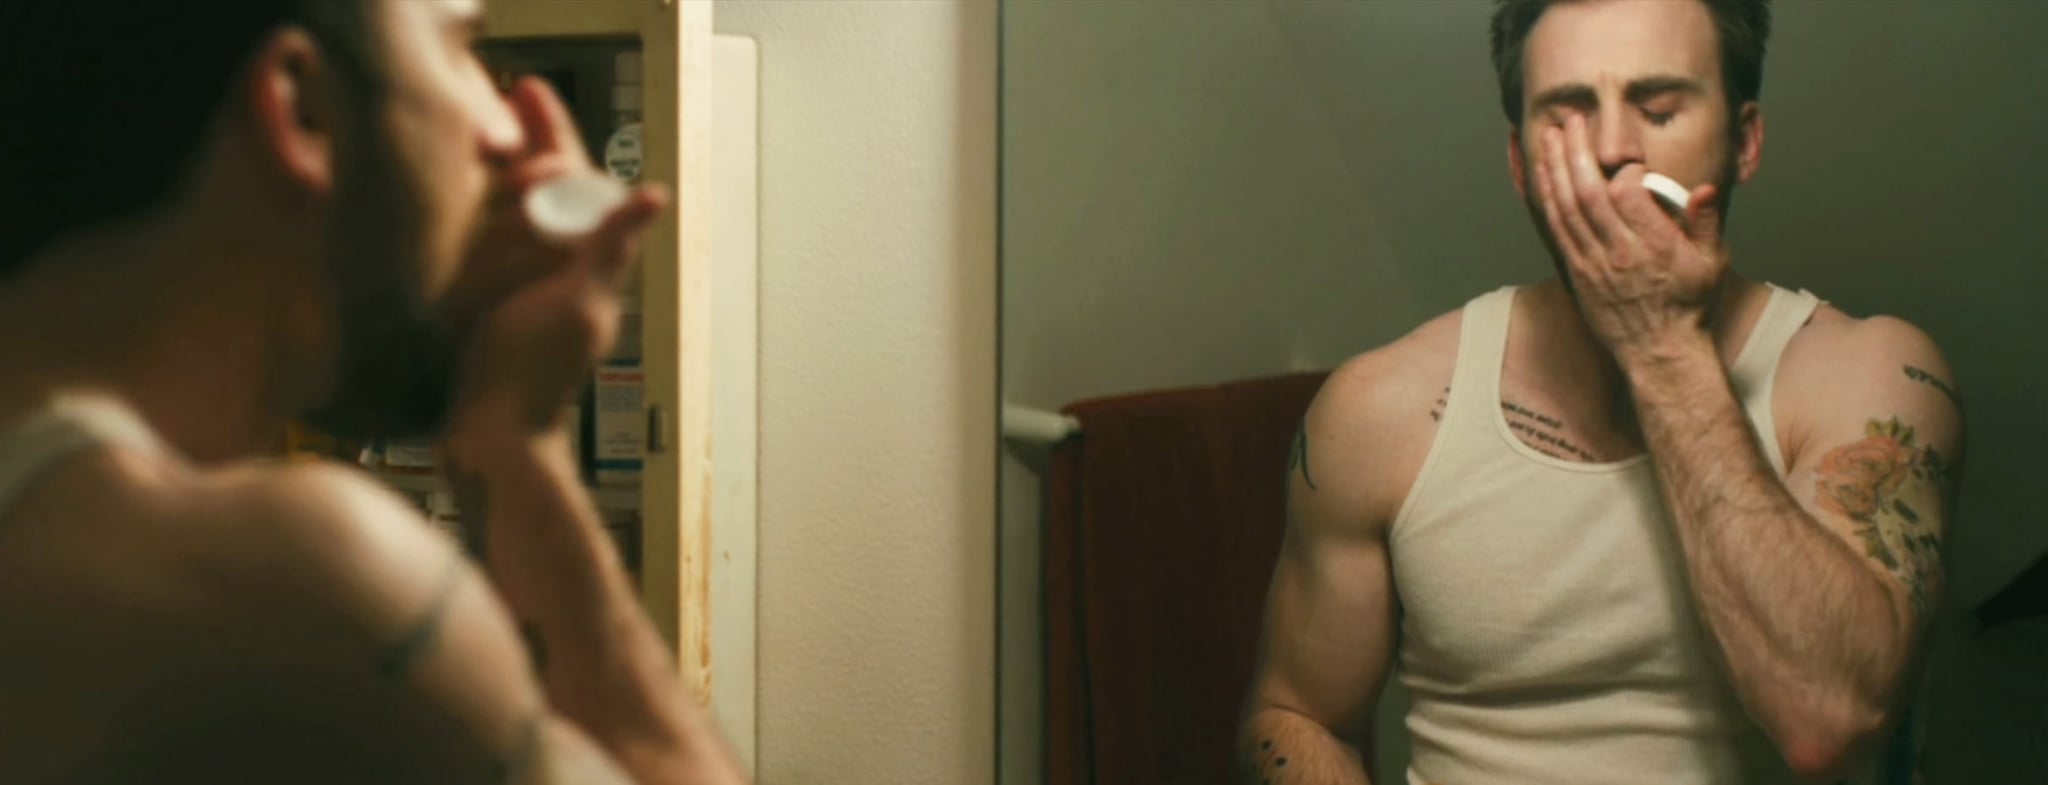 <p>"Cellular" isn't the only movie where Evans shows off his real-life ink. Though not all the tattoos seen on Evans's body in 2011's "Puncture" are real (like, for instance, the skull tattoo on his right arm), the small line of text above that skull tattoo <em>is</em> real. That tattoo reads "loyalty," and you can get a <a href="http://people.com/style/evan-rachel-wood-chris-evans-naked-gucci-ad/" class="ga-track">better look at it</a> in Evans's campaign for Gucci's Guilty fragrance. Evans has never explained the meaning behind the tattoo, but it likely has something to do with family. As he said of his tattoos during a May 2012 interview with "<a href="http://www.glamour.com/story/gaze-into-chris-evans-hotness-glamour-may-2012" class="ga-track">Glamour</a>," "They're pretty much all for family. Opinions change, people grow, but I think as long as they're rooted in the family, I'll probably never regret them." </p>